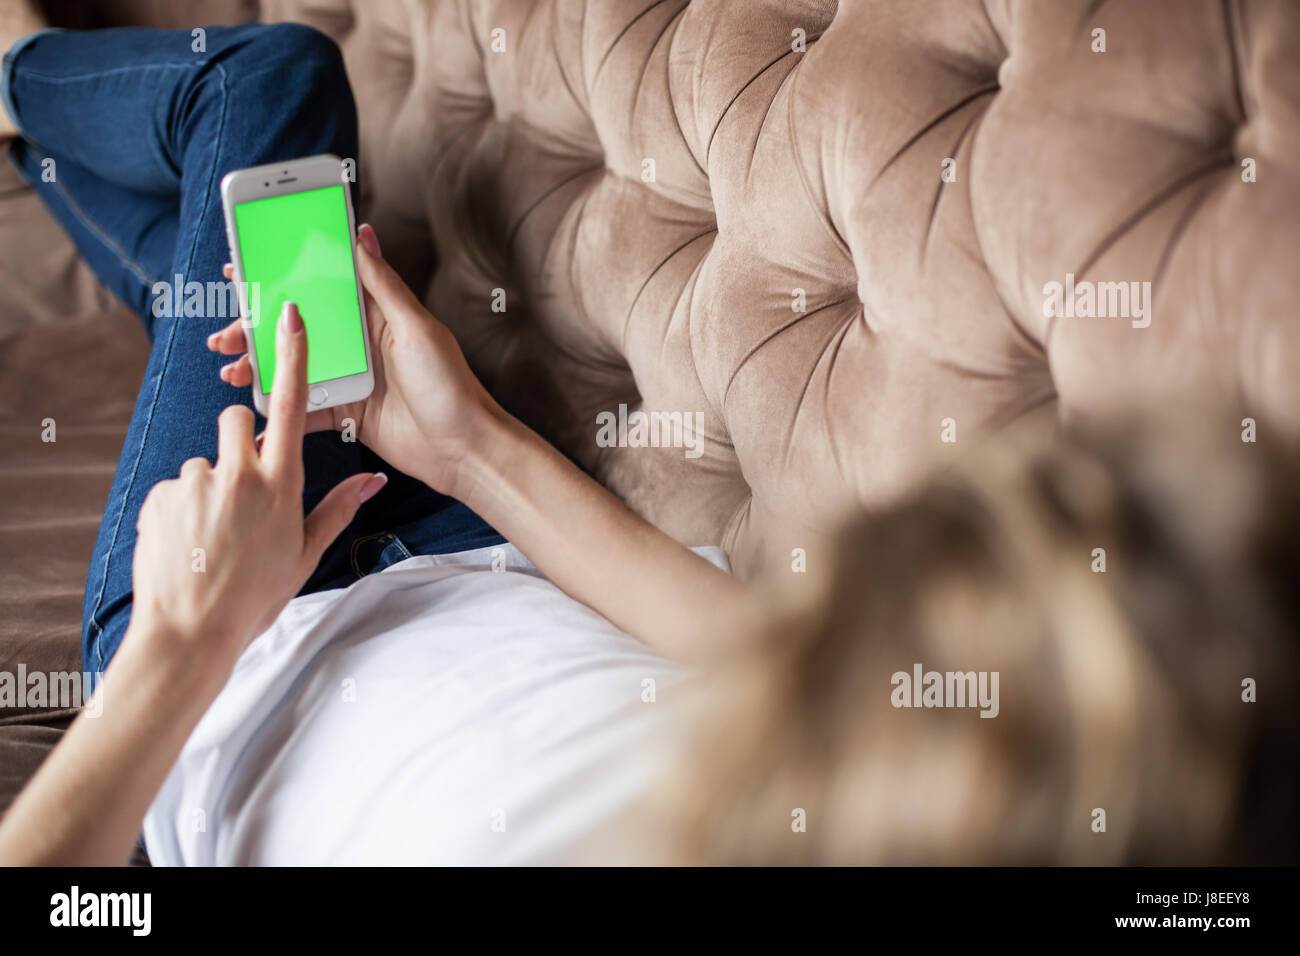 Beautiful girl lying on the sofa with the phone in her hands. Phone with green screen. Stock Photo